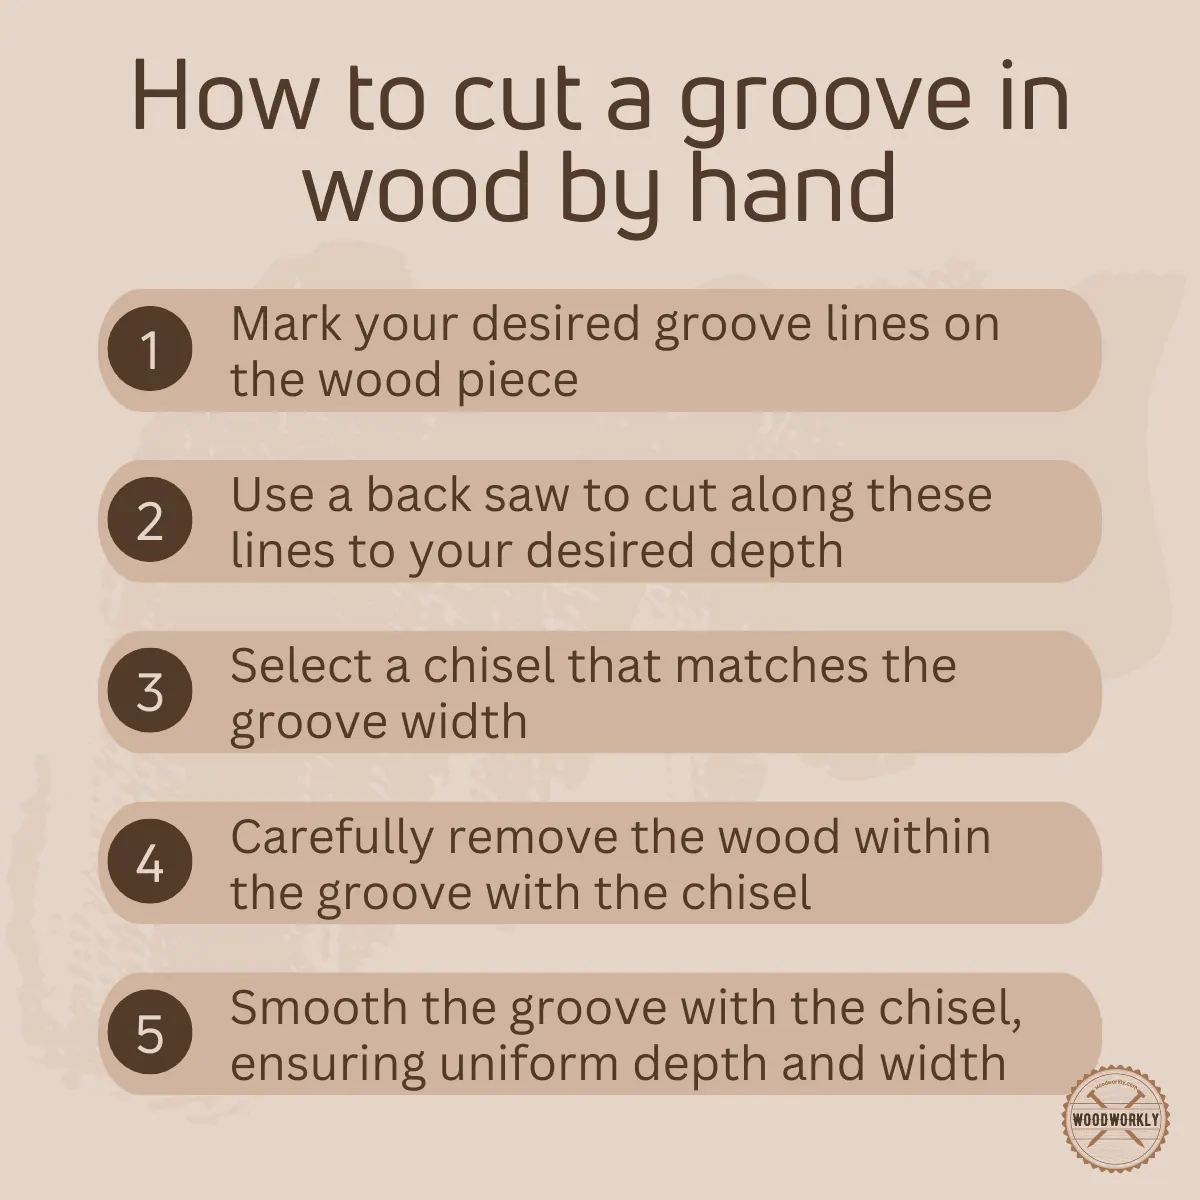 How to cut a groove in wood by hand